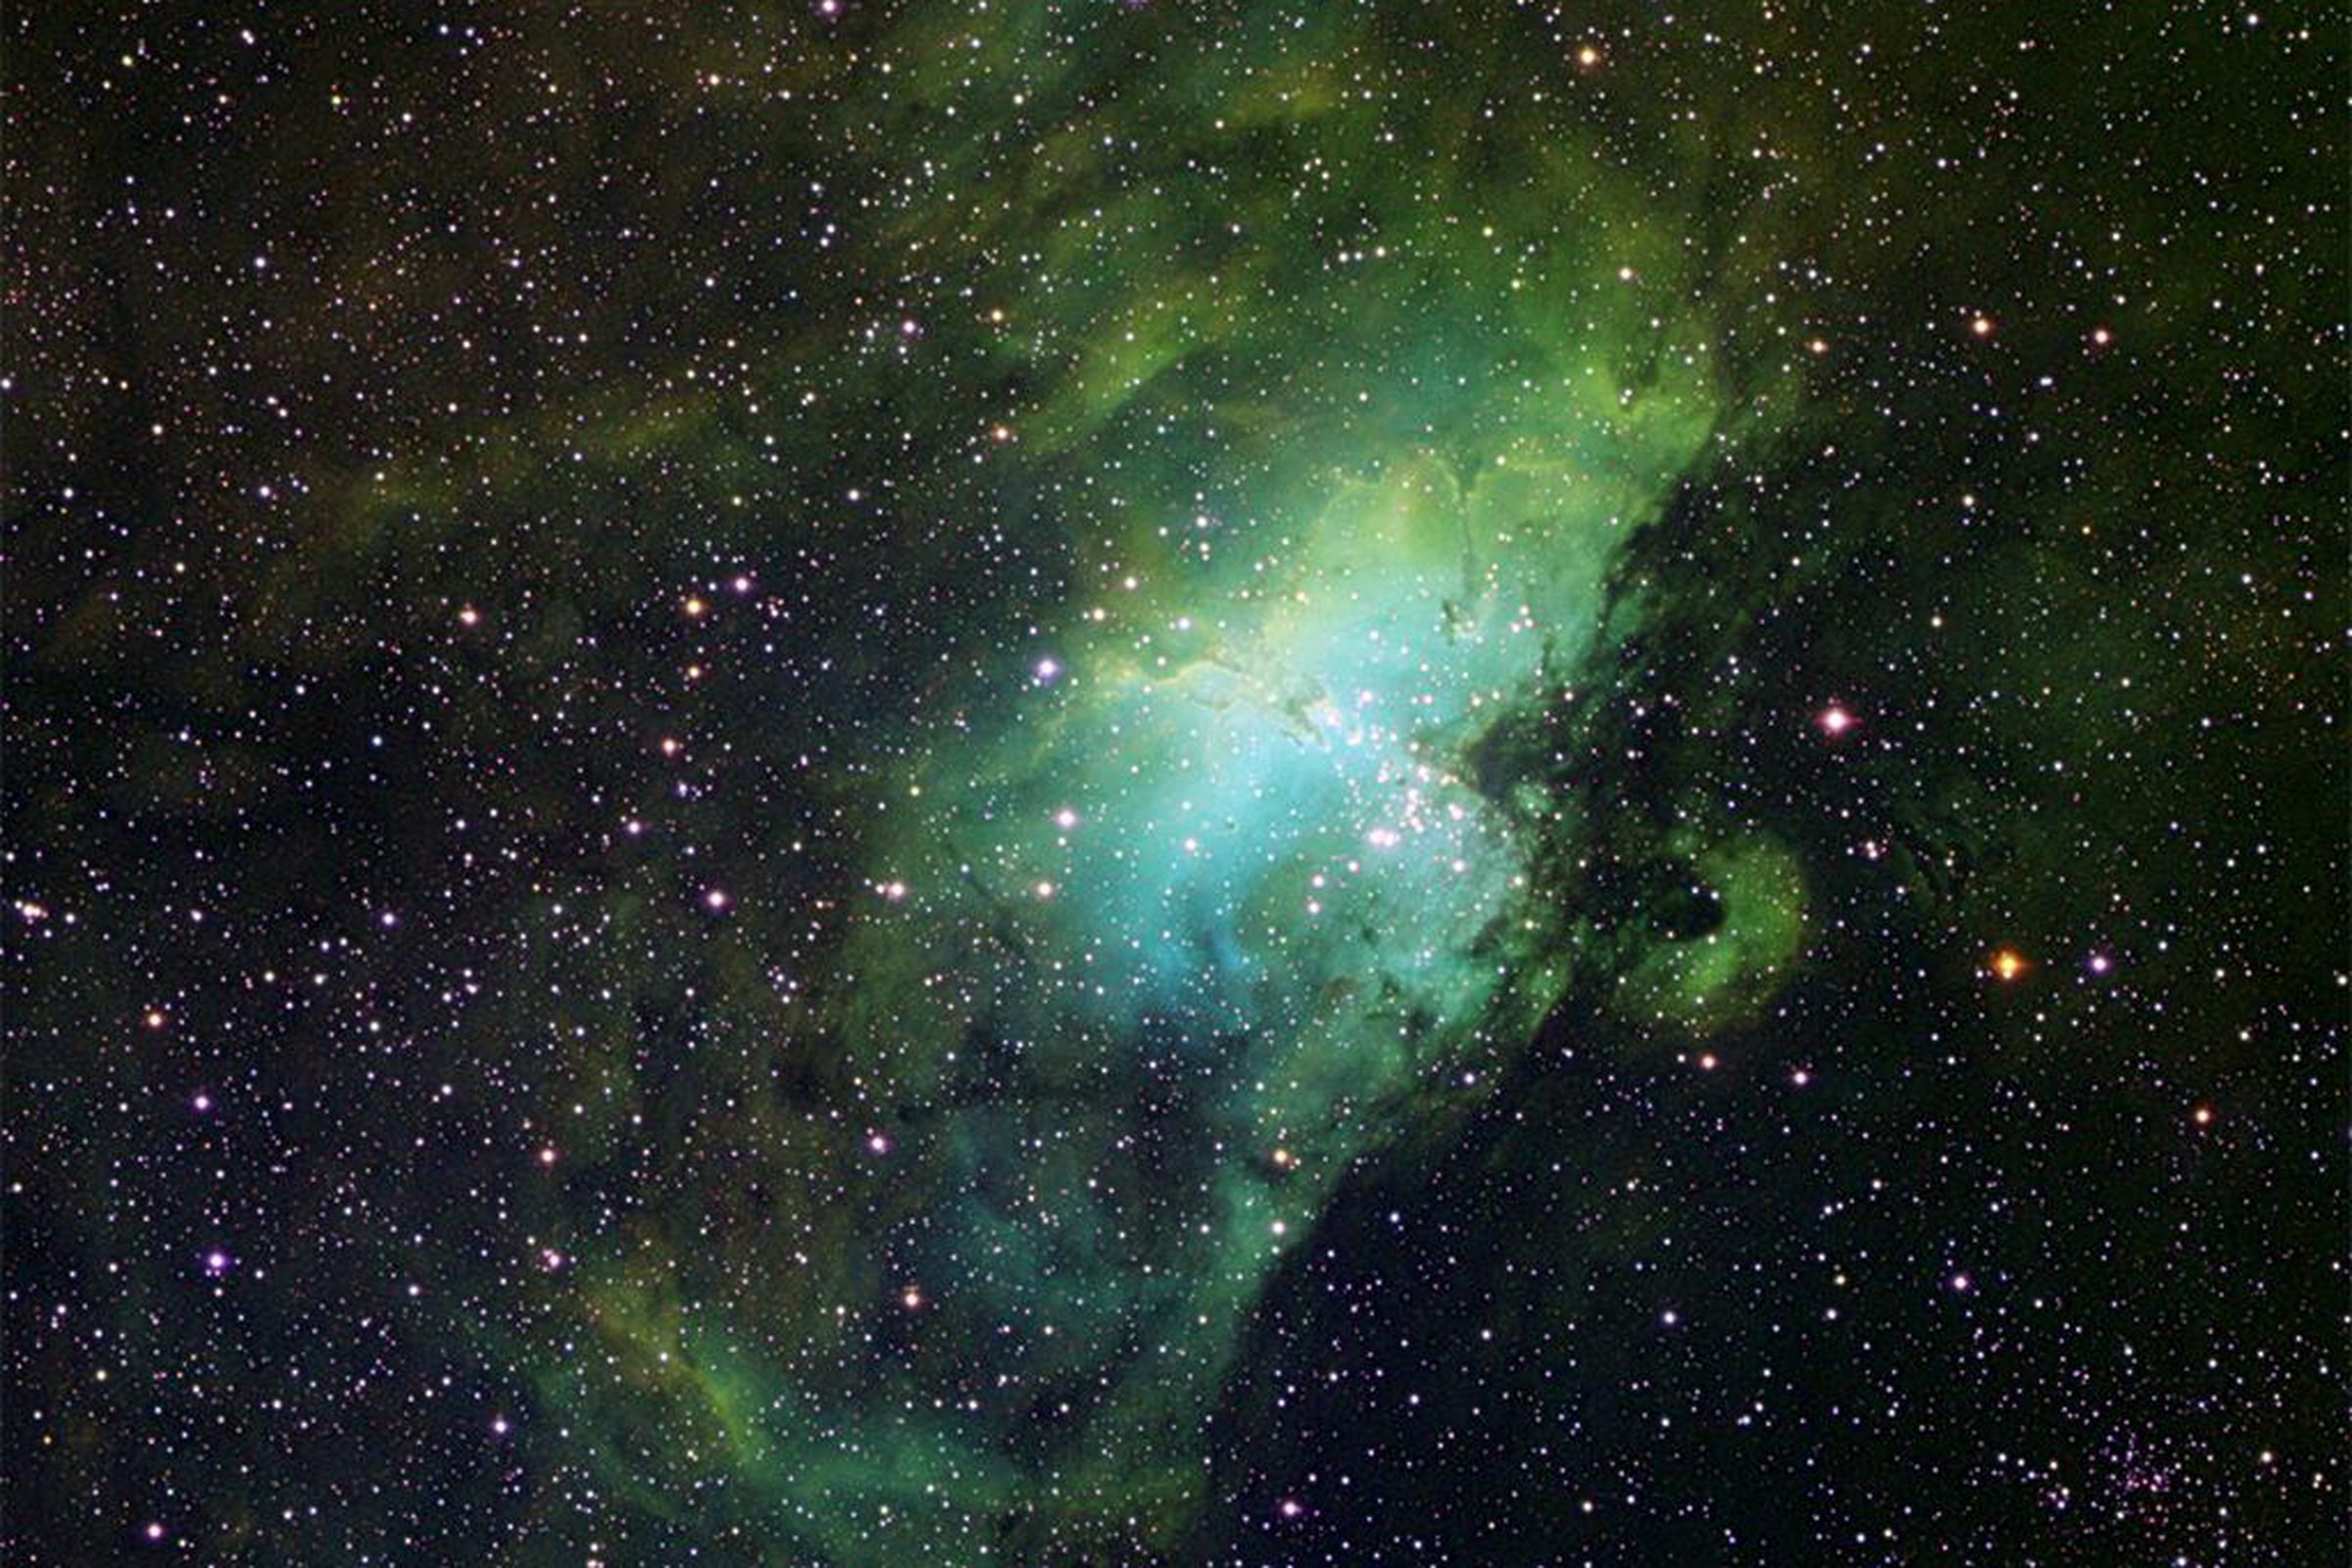 A greenish version of an astrophotography picture